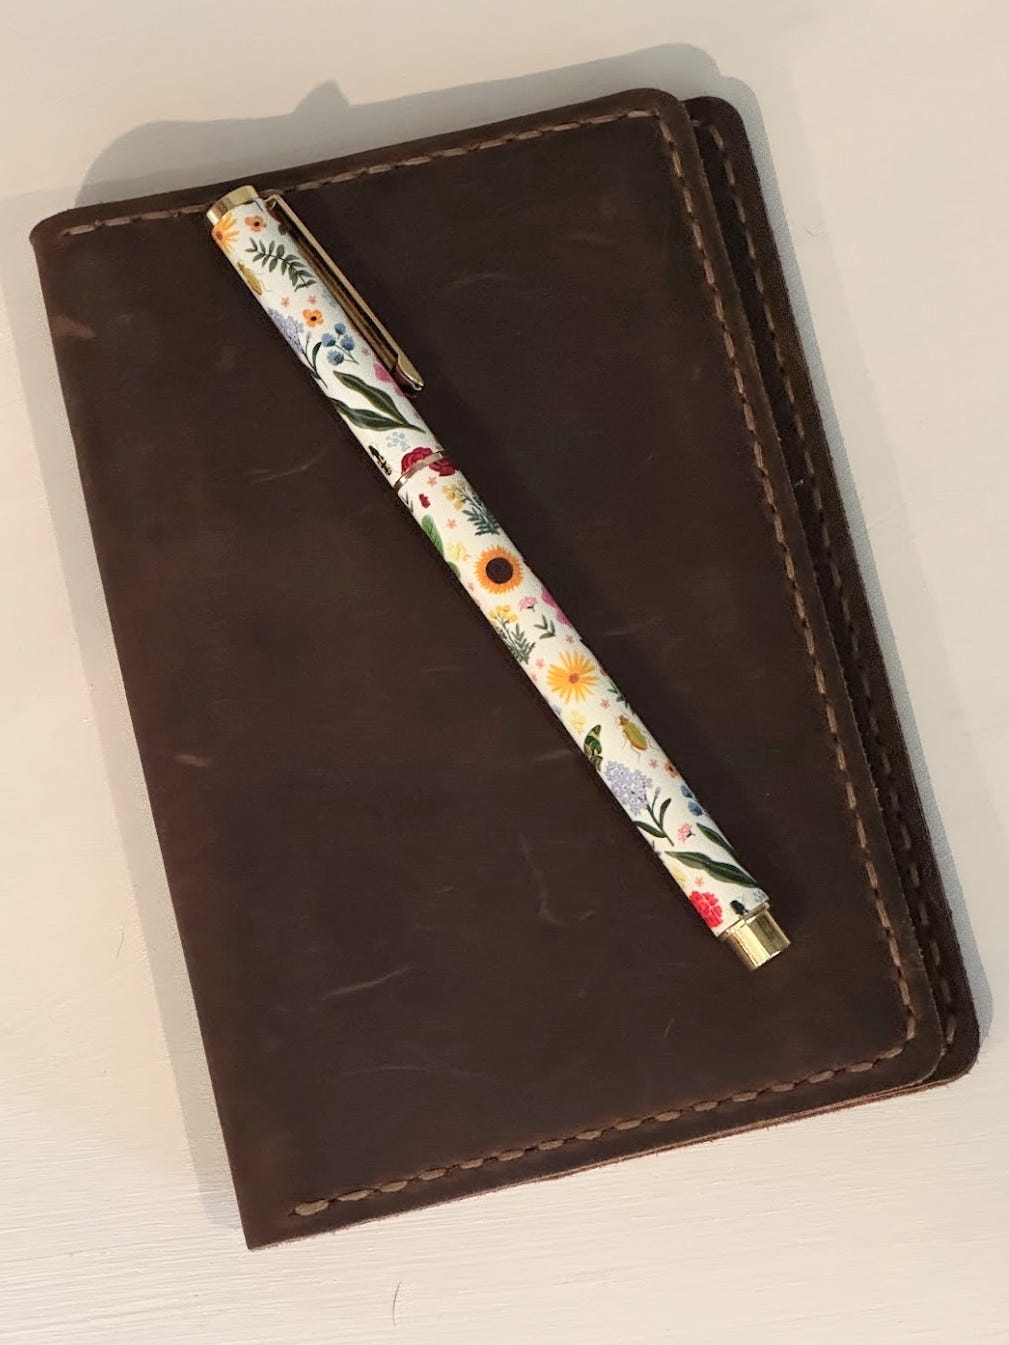 A little brown leather notebook cover with a small pen on top. The pen is white with illustrations of flowers 